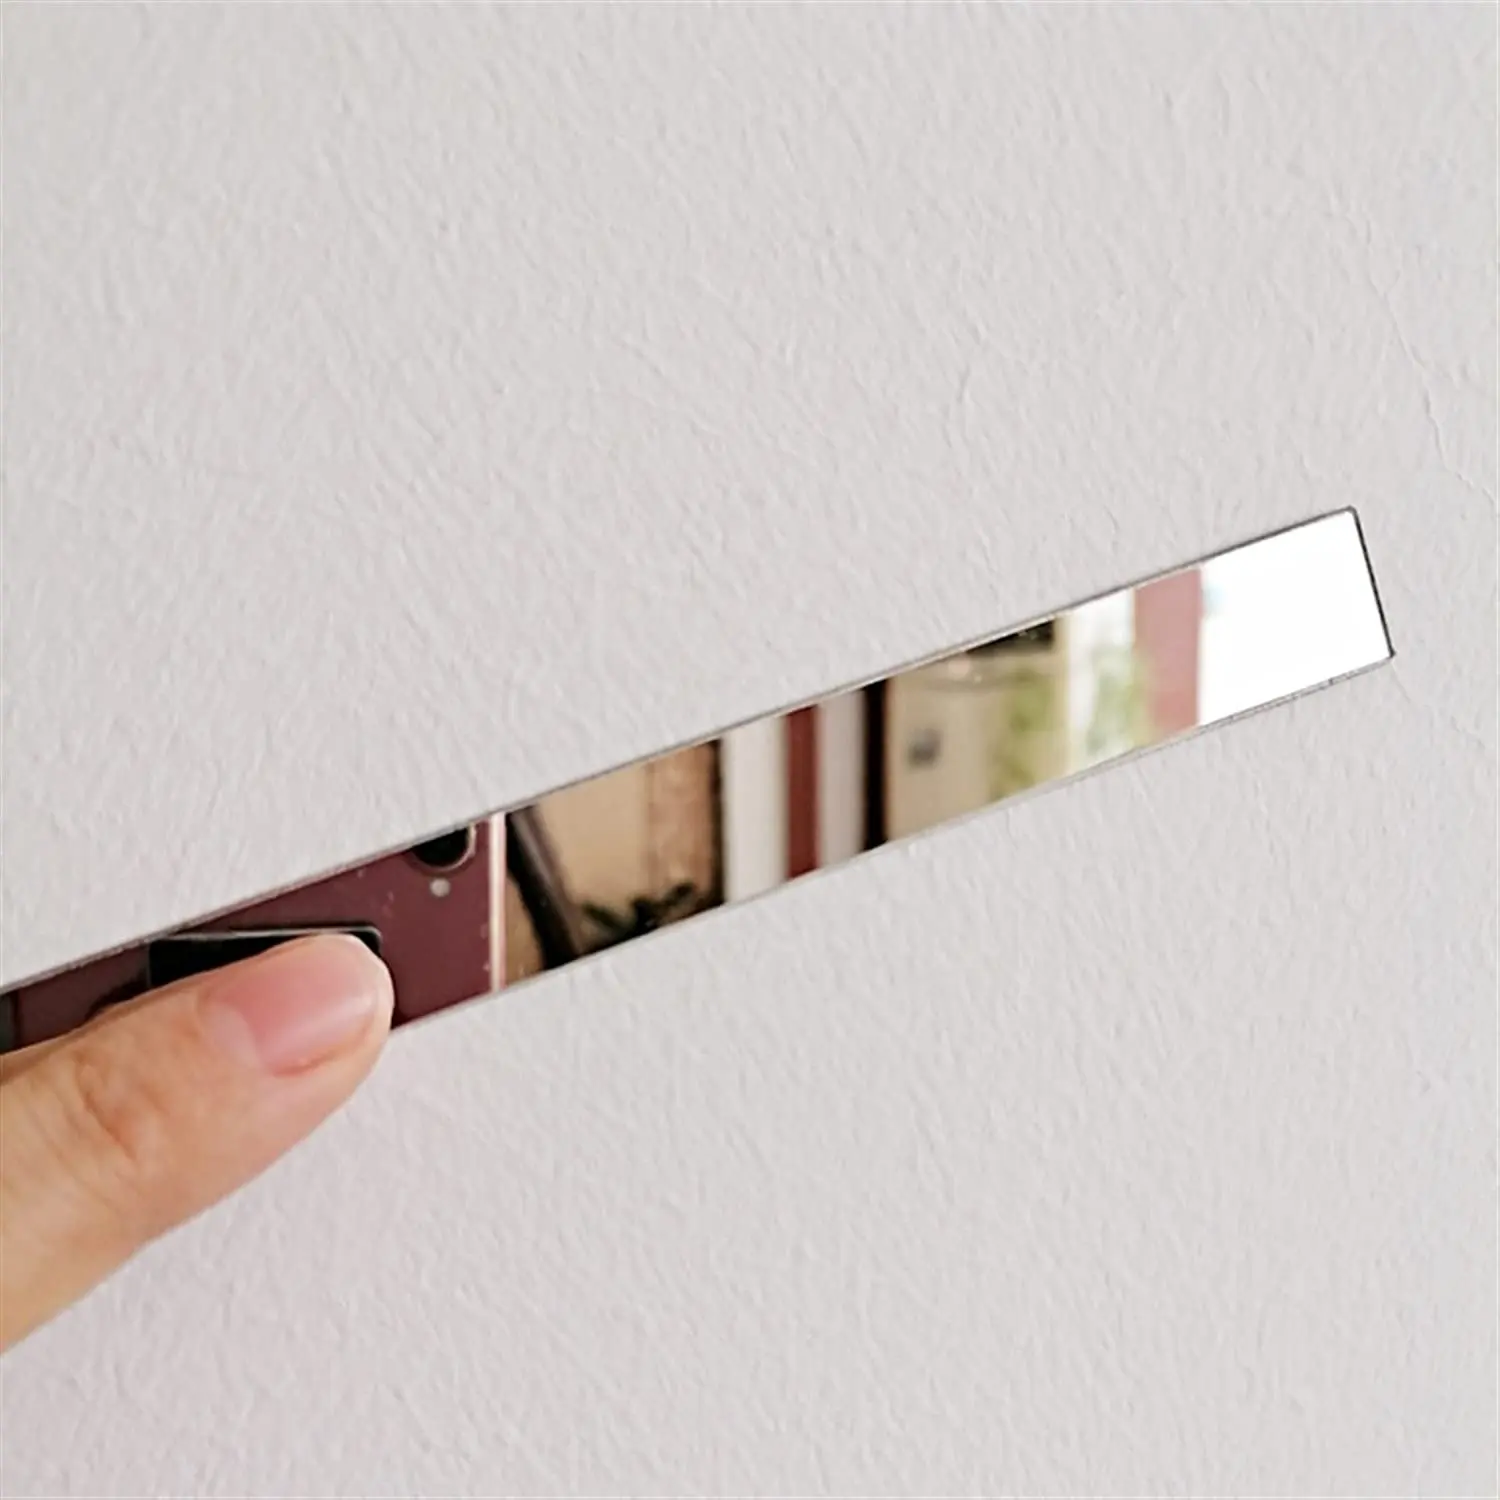 Decor Wall Molding Trim Border Sticker Self-Adhesive Stainless Steel Decorative Strips for Bedroom and Living Room Frame